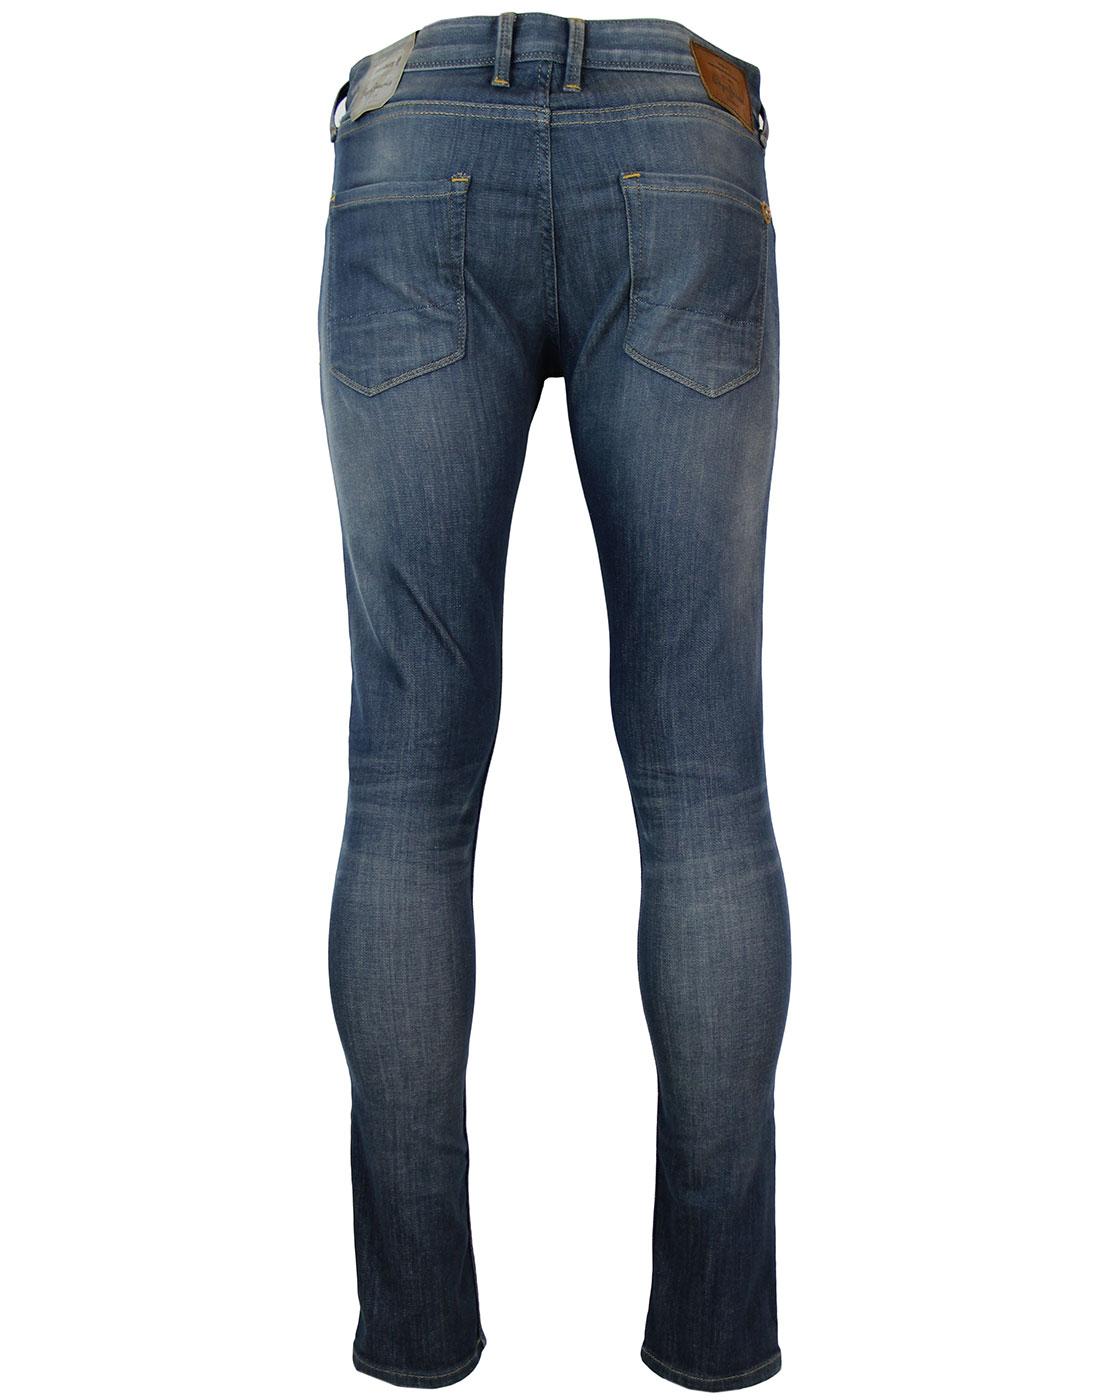 PEPE JEANS Finsbury Retro Indie Mod Drainpipe Jeans Faded Blue